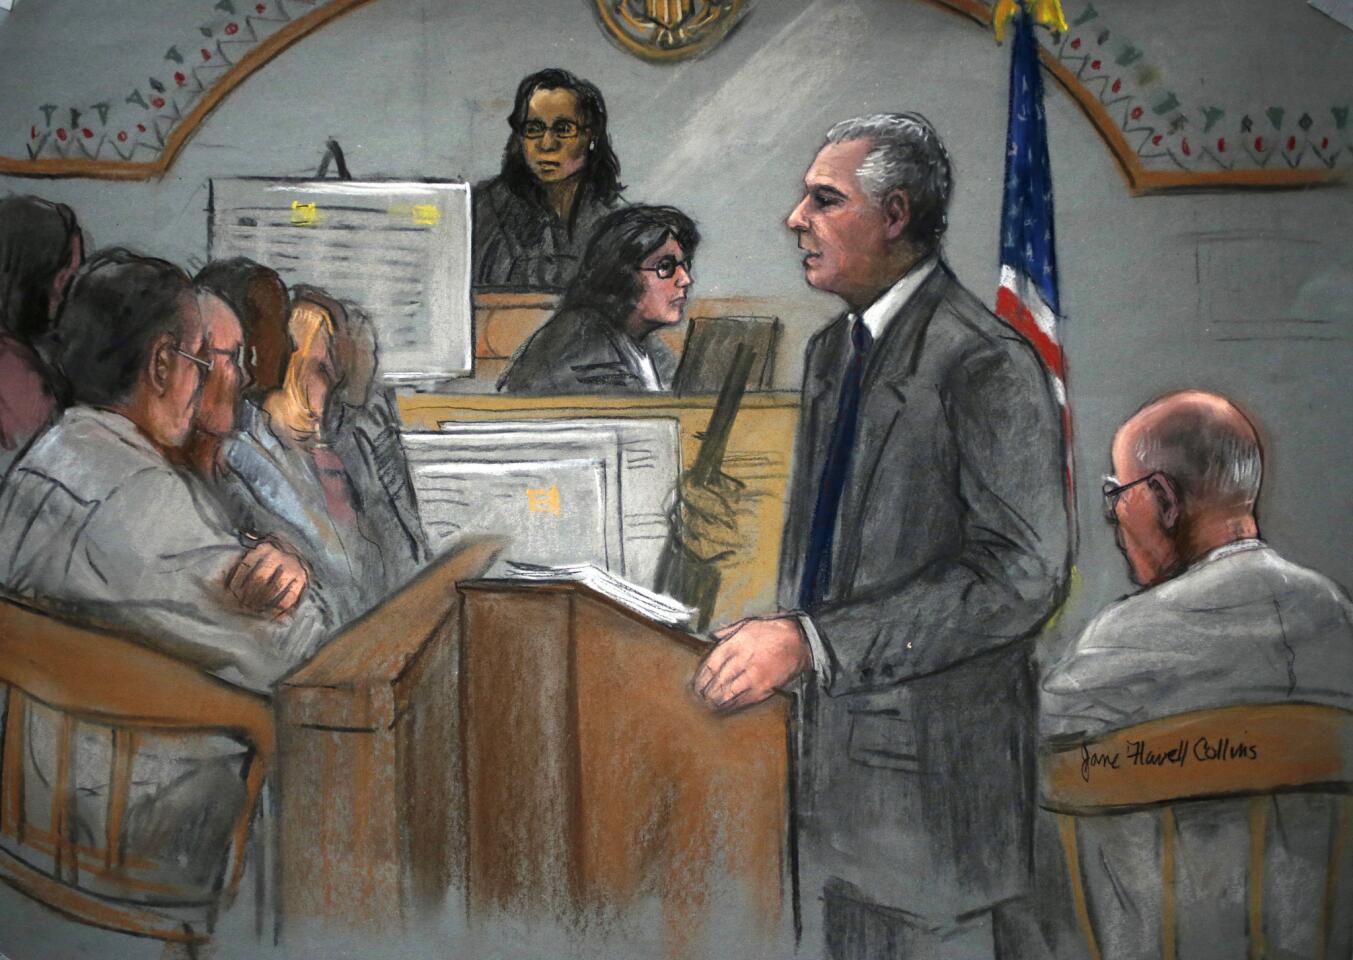 In this courtroom sketch, prosecutor Fred Wyshak, standing, speaks during closing arguments in the trial of James "Whitey" Bulger, right, at U.S. District Court, in Boston on Aug. 5, 2013. A federal prosecutor summed up the government's case by calling Bulger "one of the most vicious, violent and calculating criminals ever to walk the streets of Boston," and urged the jury to convict him of charges that include 19 killings committed during the 1970s and '80s.